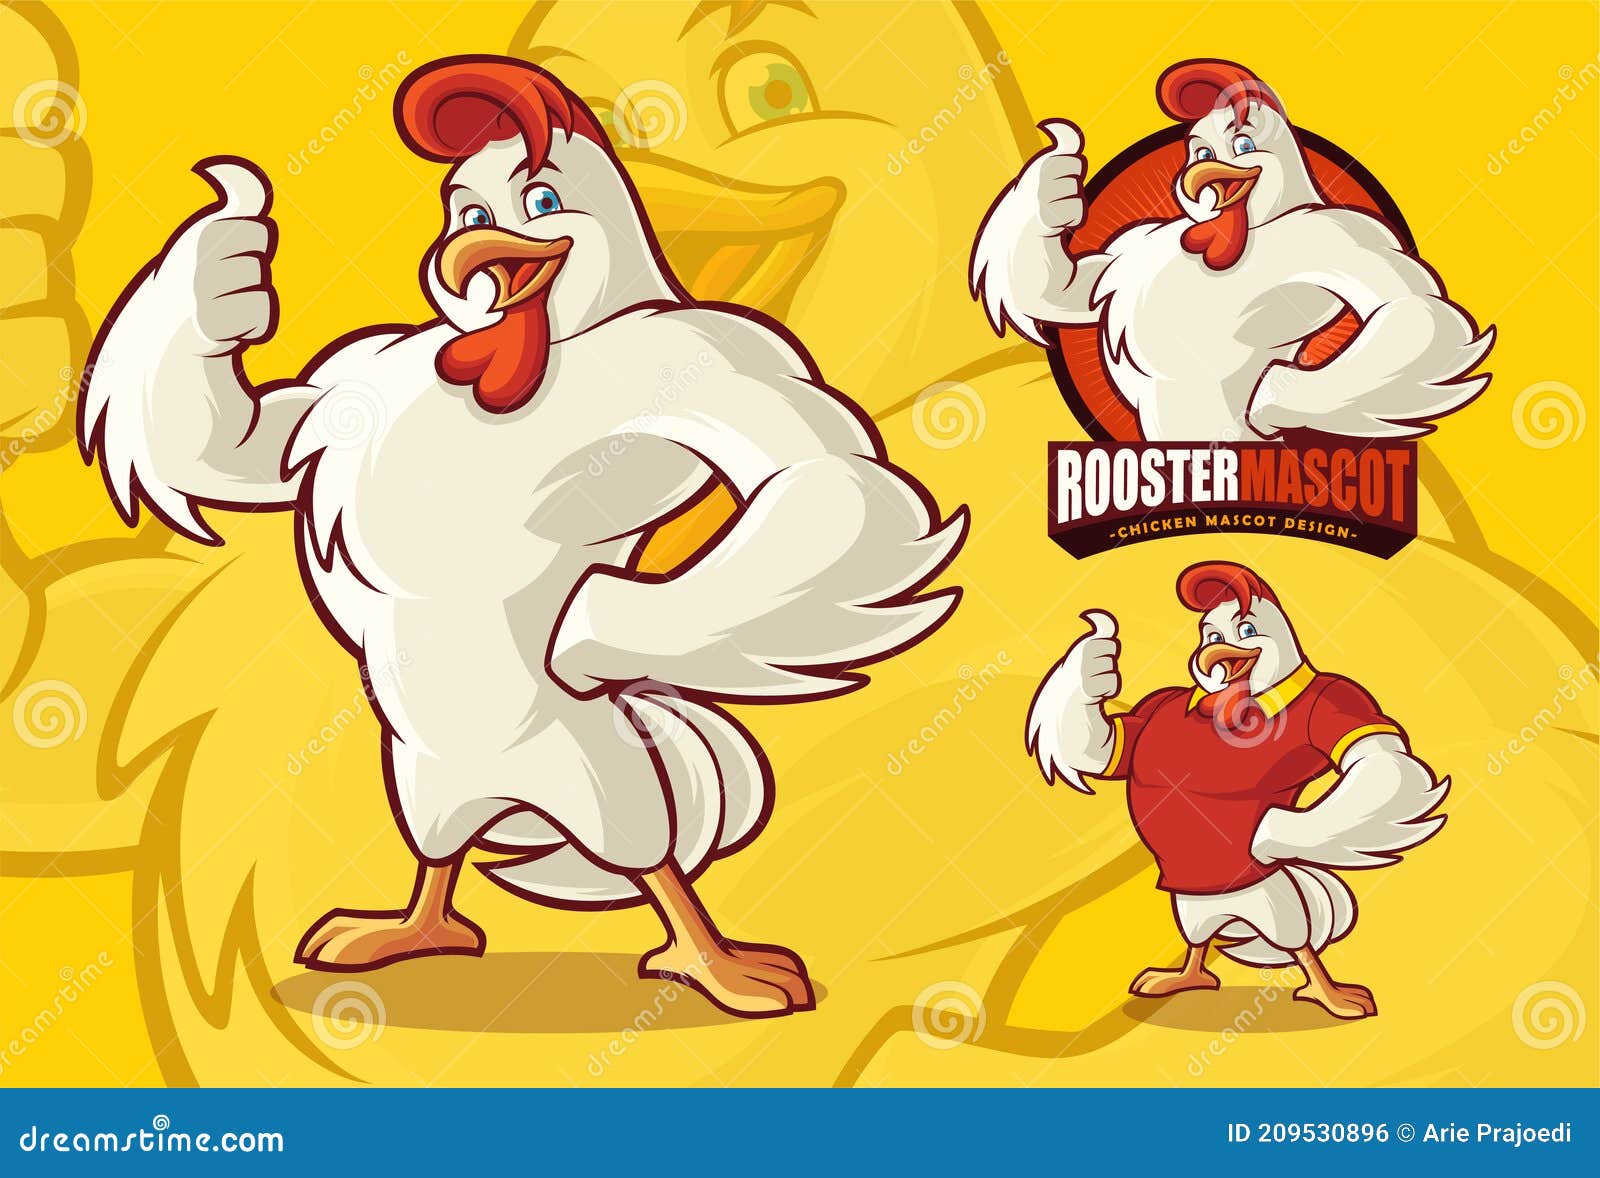 chicken mascot for food business with optional apprearance